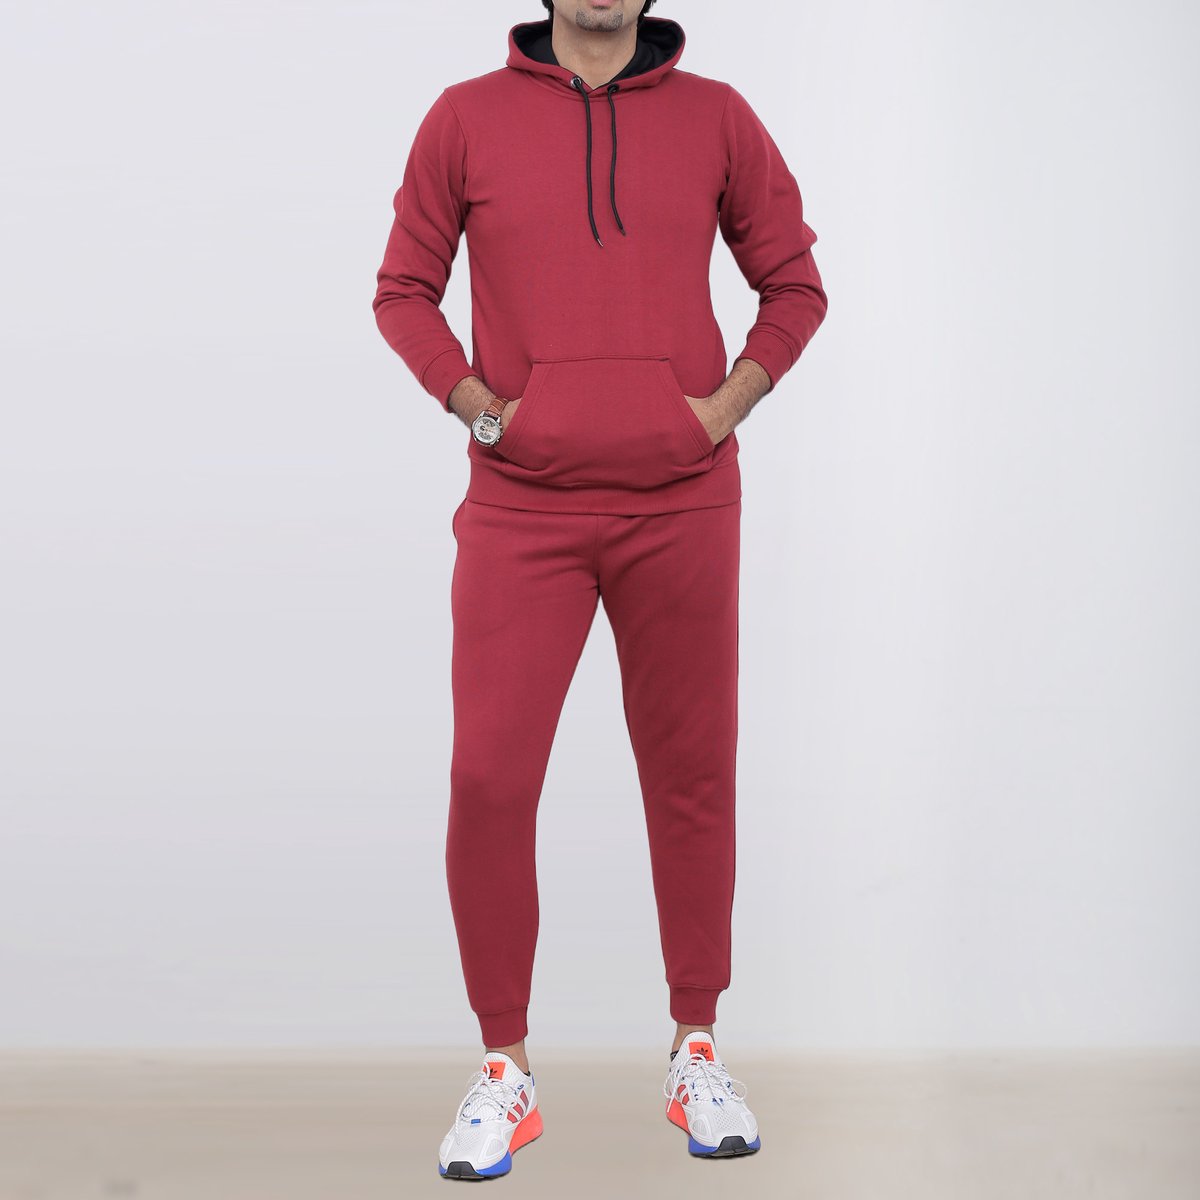 ICONICX Mens Plain Tracksuit Fleece Pullover Hoodie Pants Hooded Sweatshirt with Trousers Cotton Jogging Suit Exercise, Fitness, Boxing MMA, MAROON